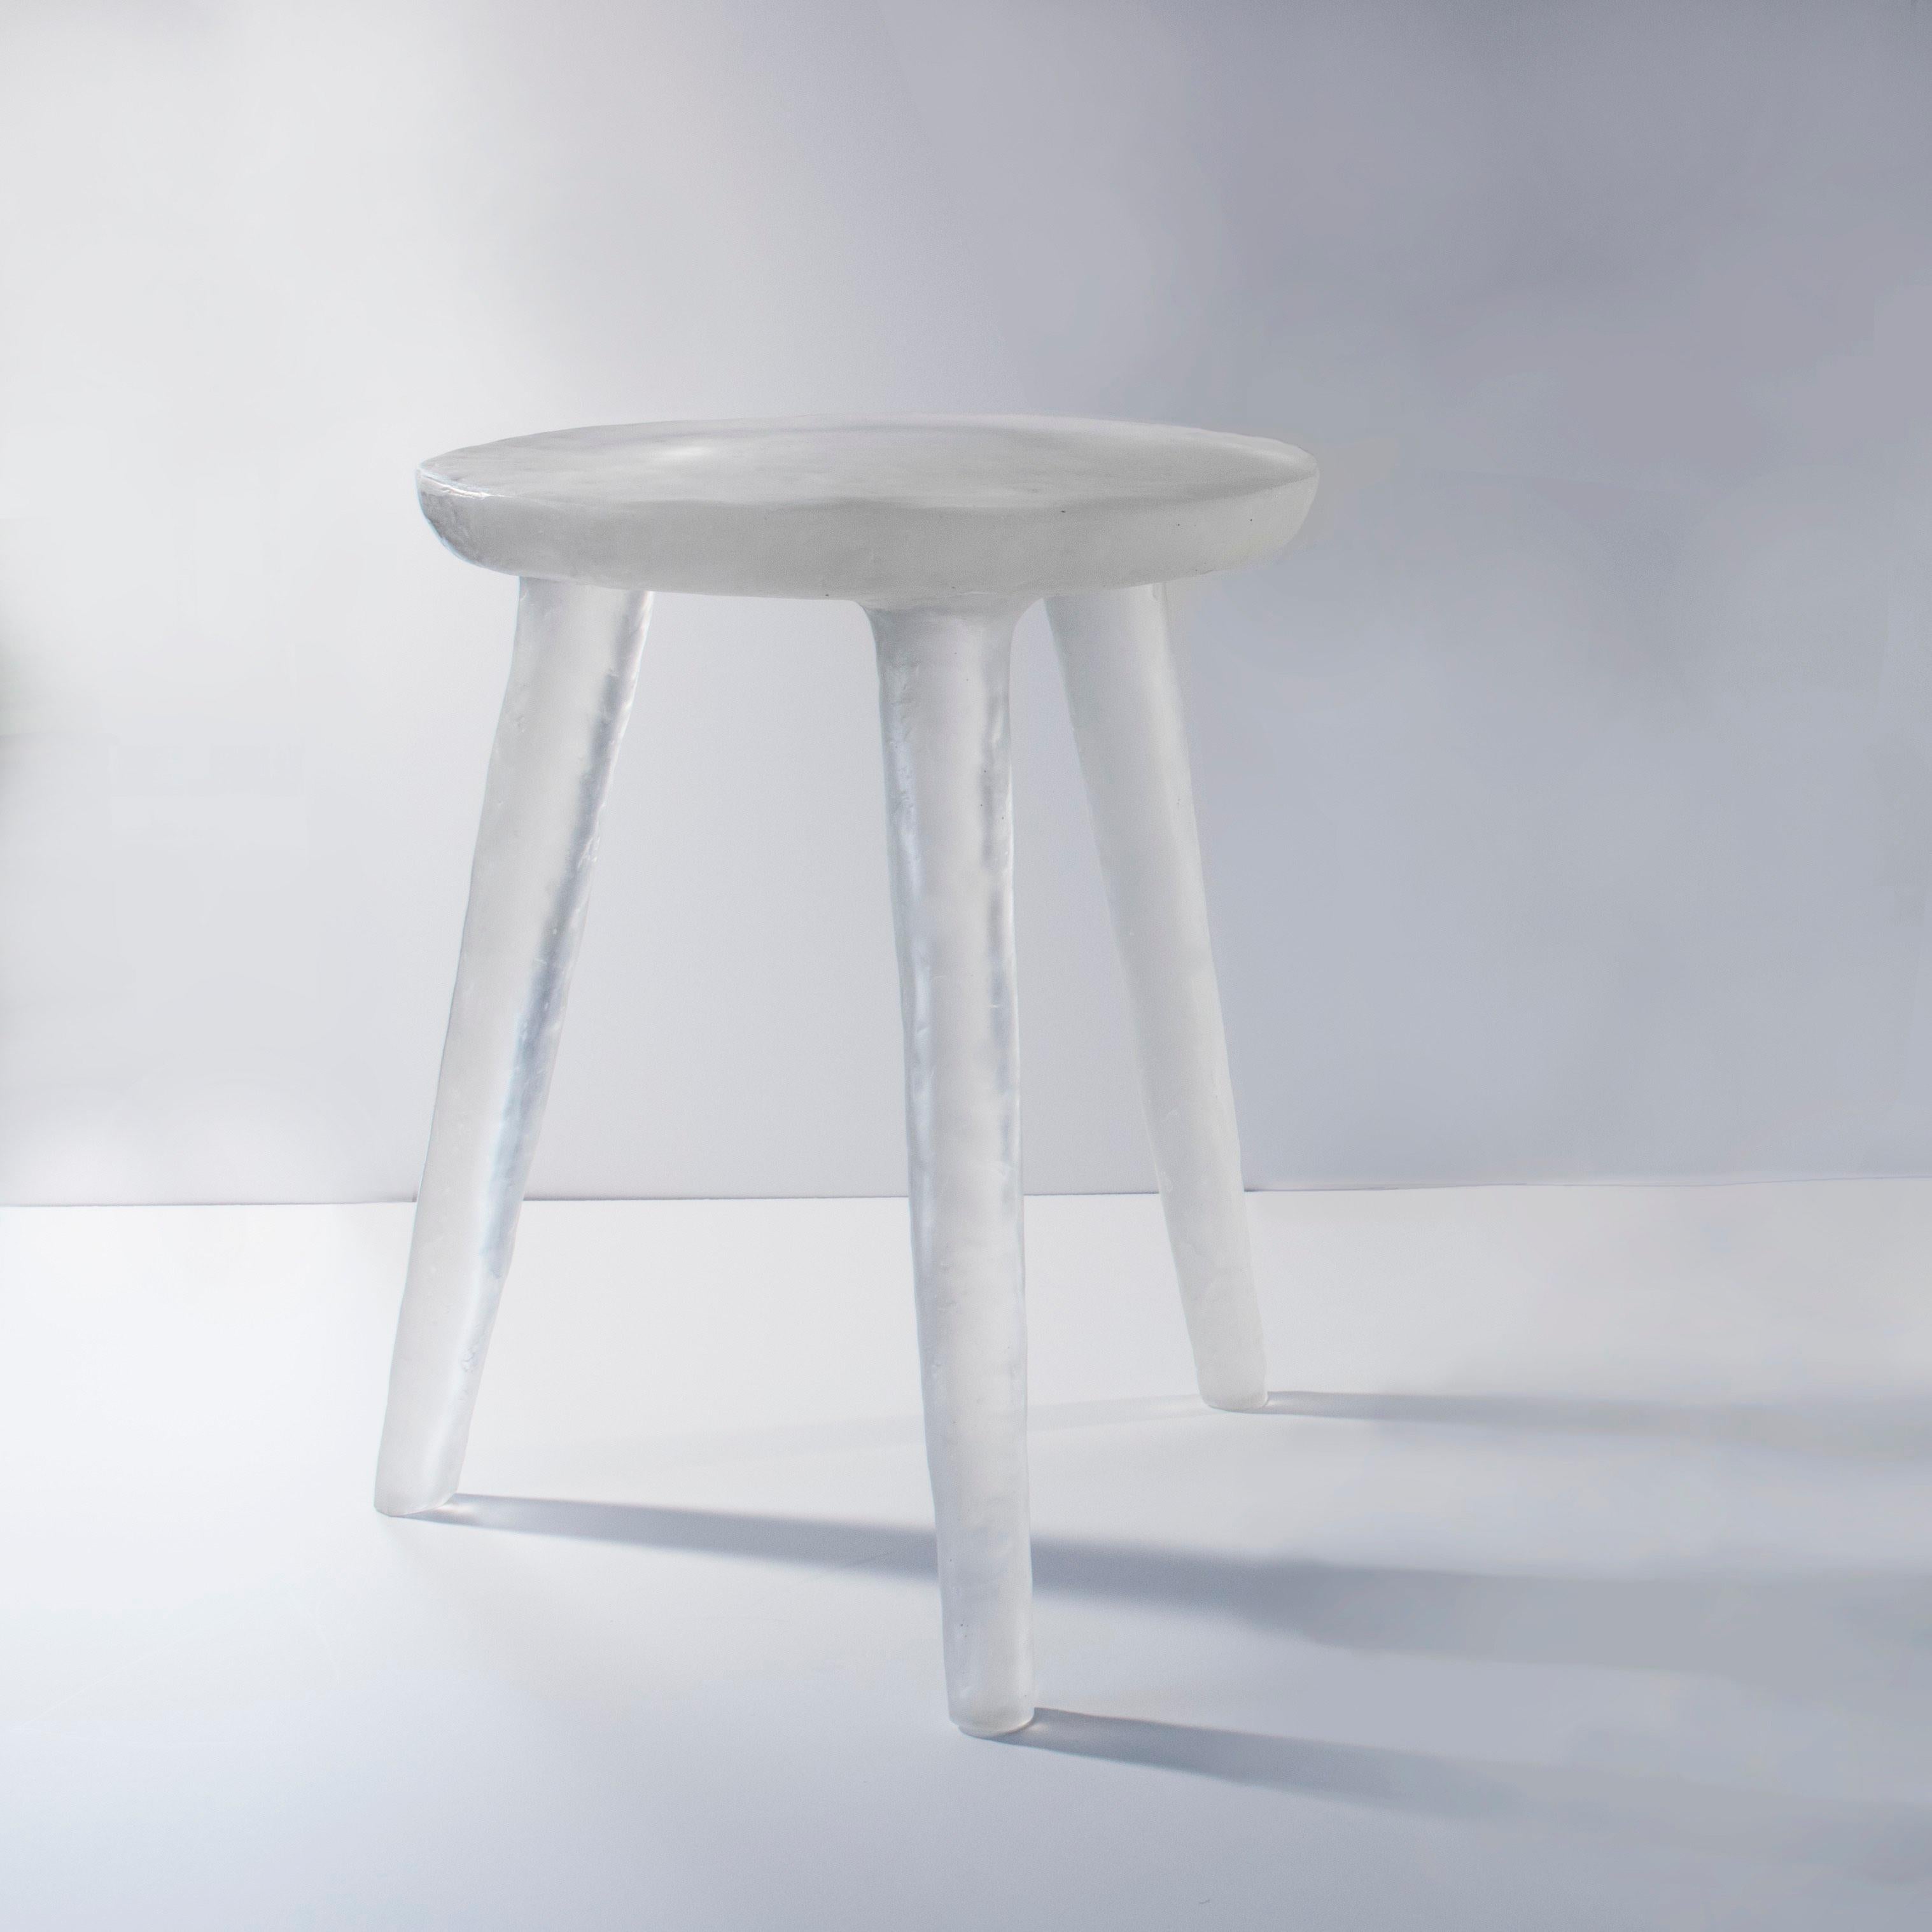 his piece debuted in 2017 and clients use it as both a stool and side table.

Handmade in NY from a composite made with recycled resins. Because of this, no two are ever alike.

Available in translucent versions of: pink, periwinkle, sage, aqua,